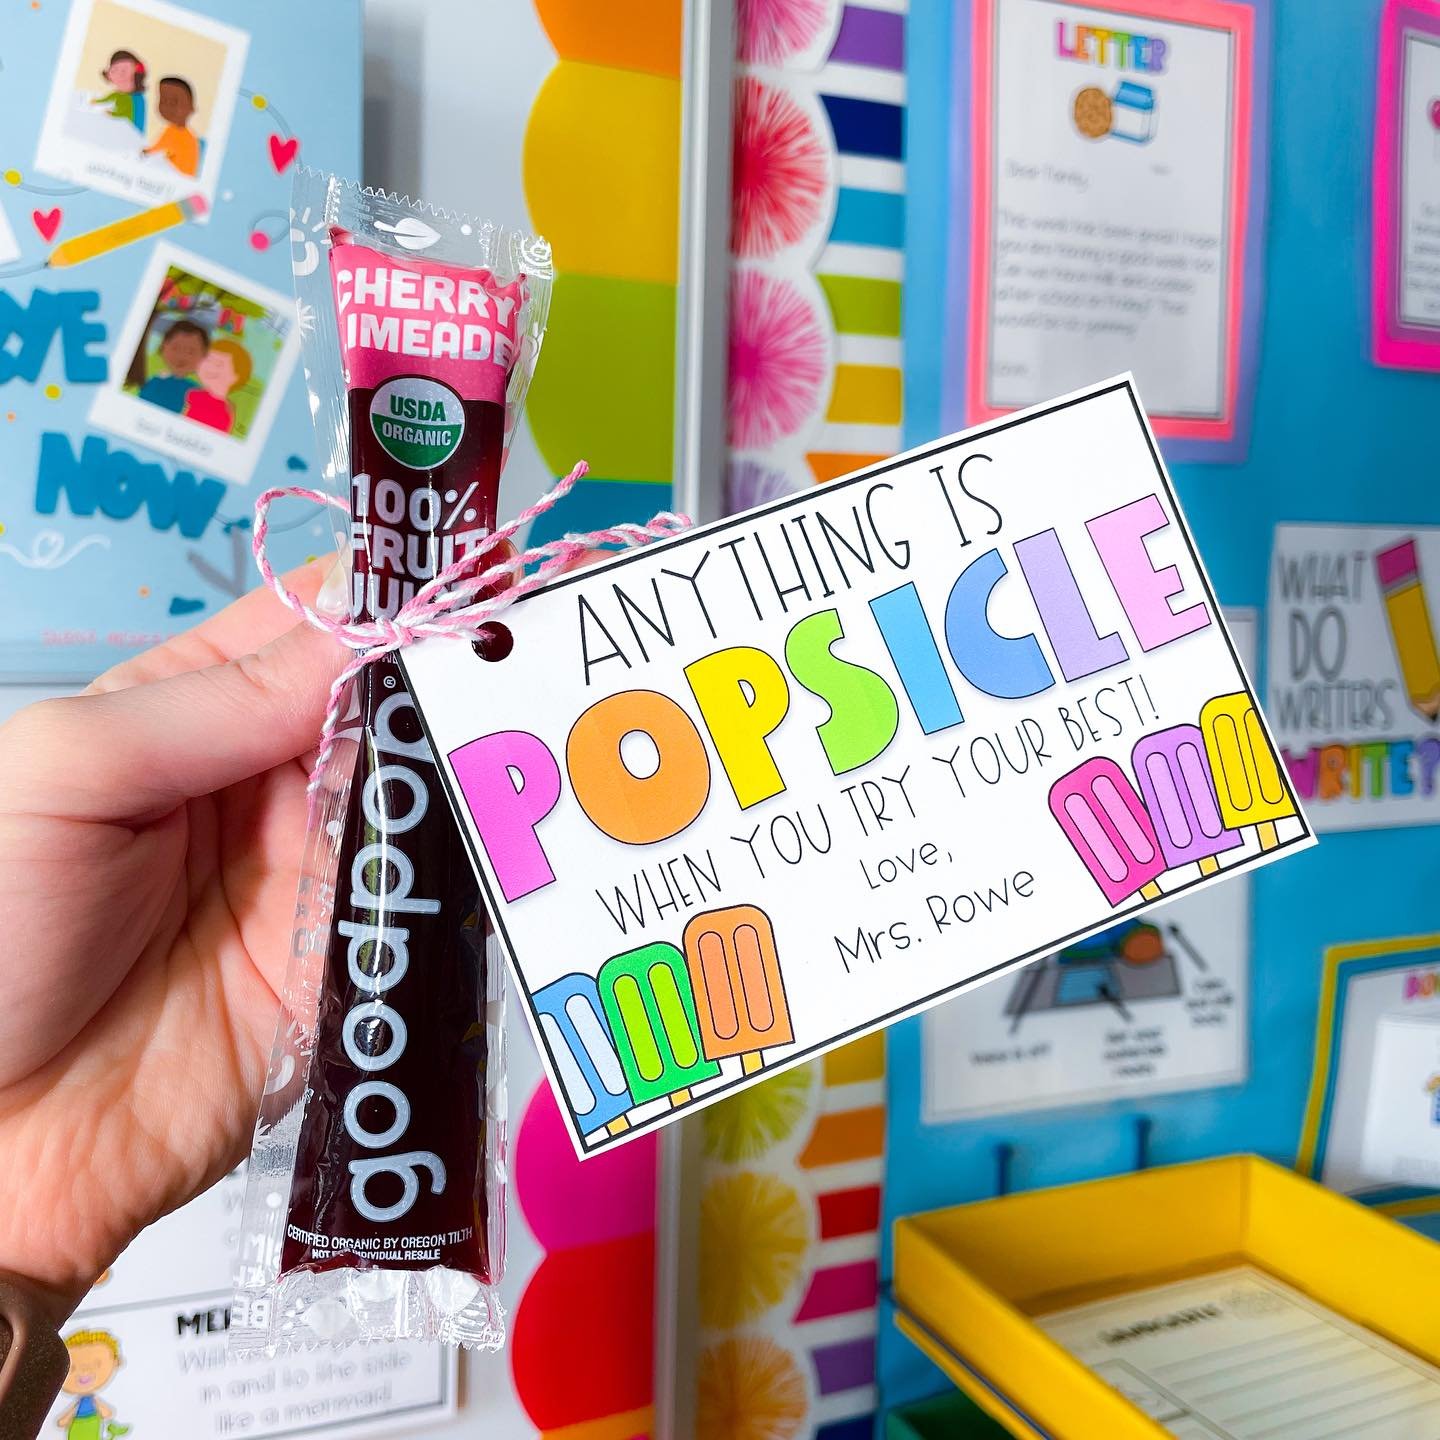 ✨FREEBIE FRIDAY! ✨

Use these popsicle tags to celebrate being done with End of Year testing! 

Surprise your students with an already frozen popsicle, or give them one straight out of the bag to take home to stick in the freezer so they have a treat